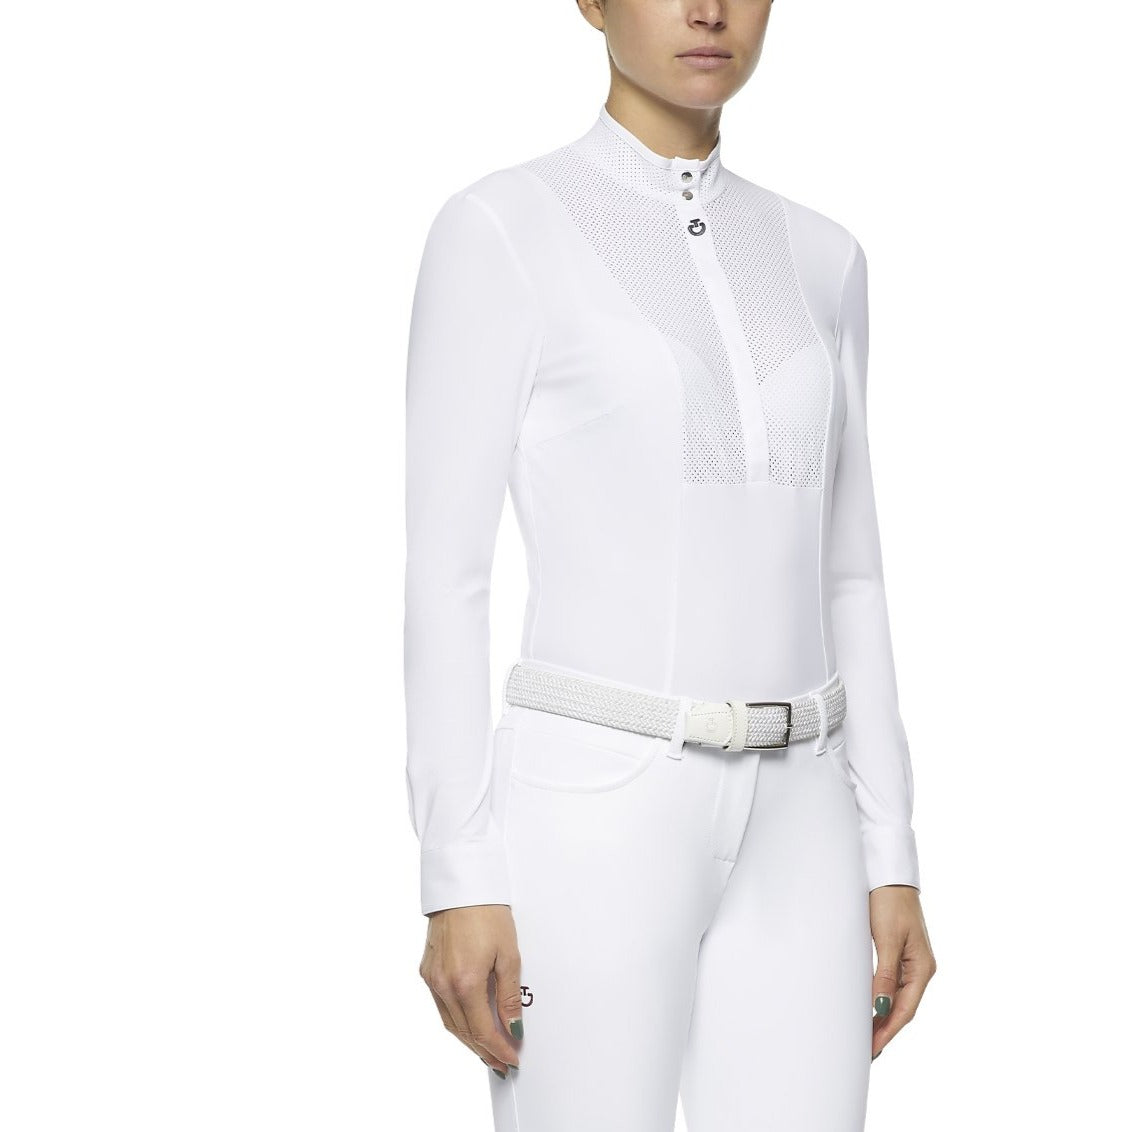 Cavalleria Toscana Perforated Bib and Collar Long Sleeve Shirt-Trailrace Equestrian Outfitters-The Equestrian